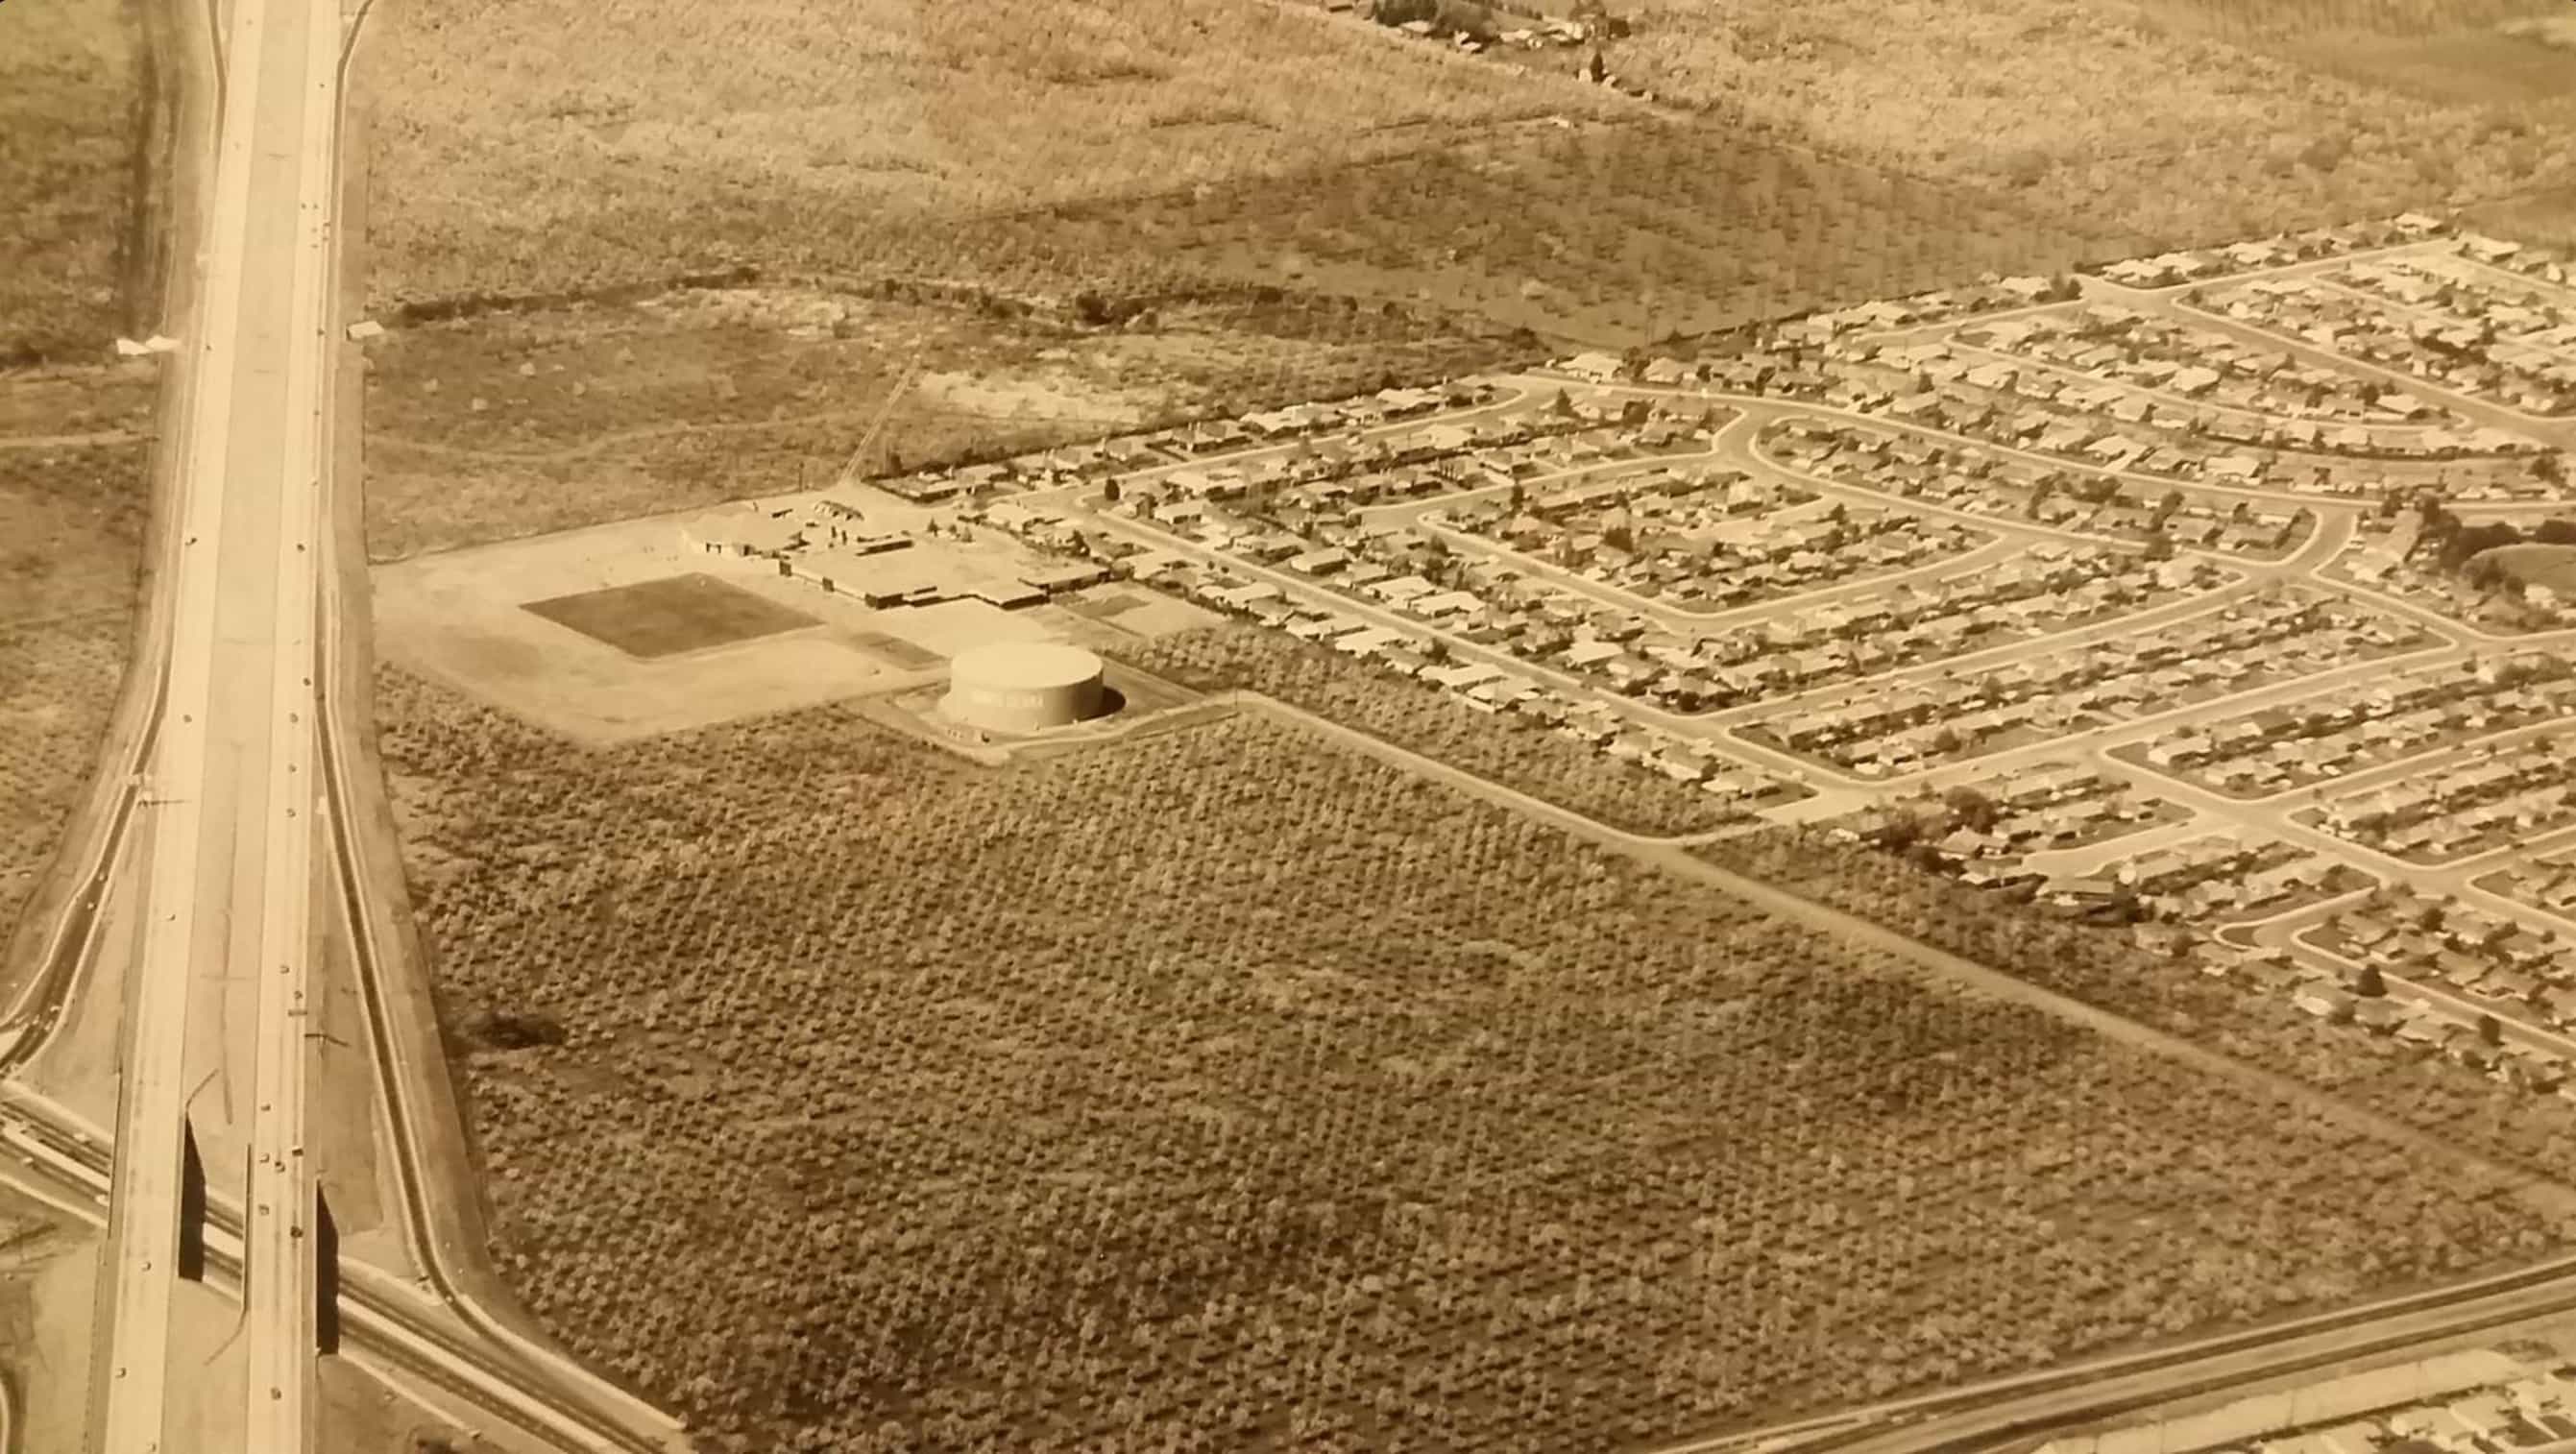 The site of Apple's spaceship campus back in 1961.